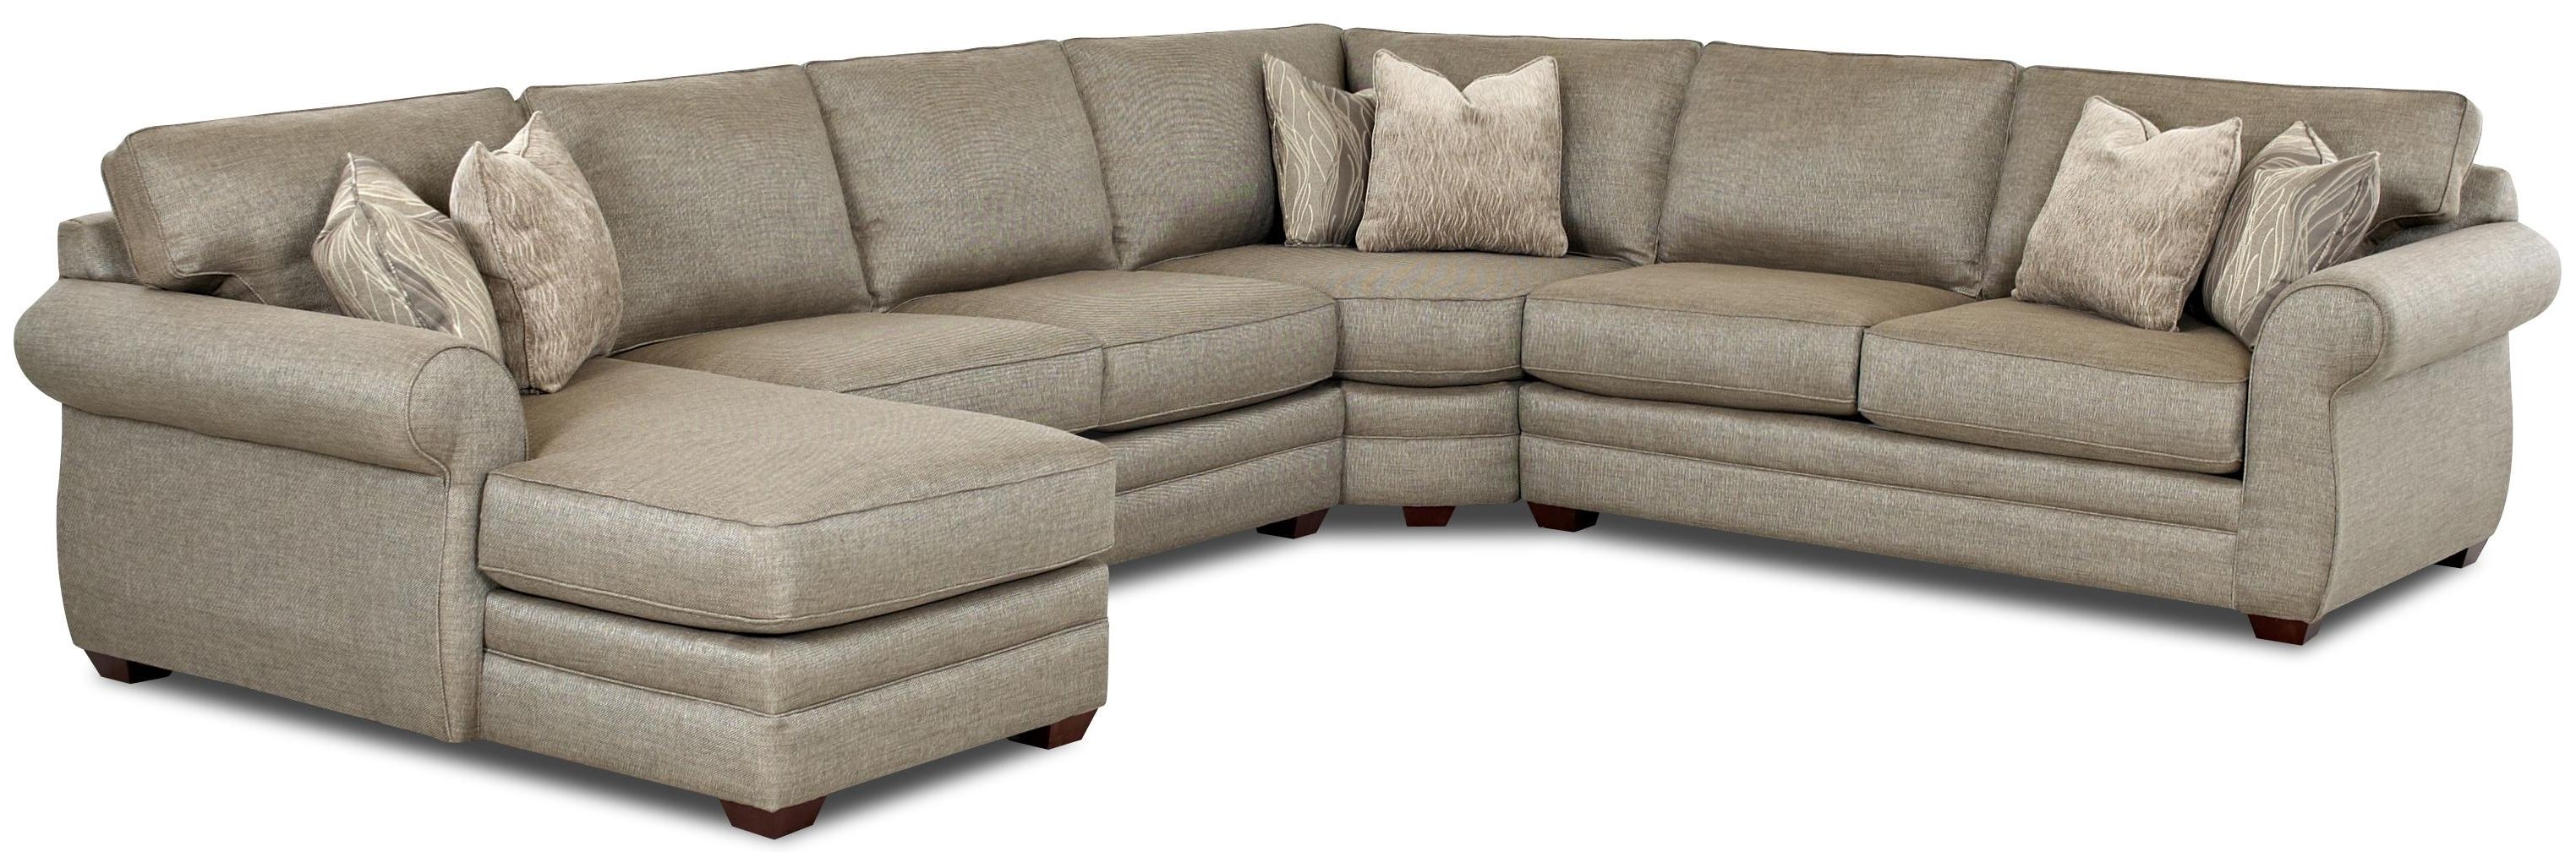 Most Recently Released Virginia Beach Sectional Sofas Pertaining To Klaussner Clanton Transitional Sectional Sofa With Right Chaise (Photo 19 of 20)